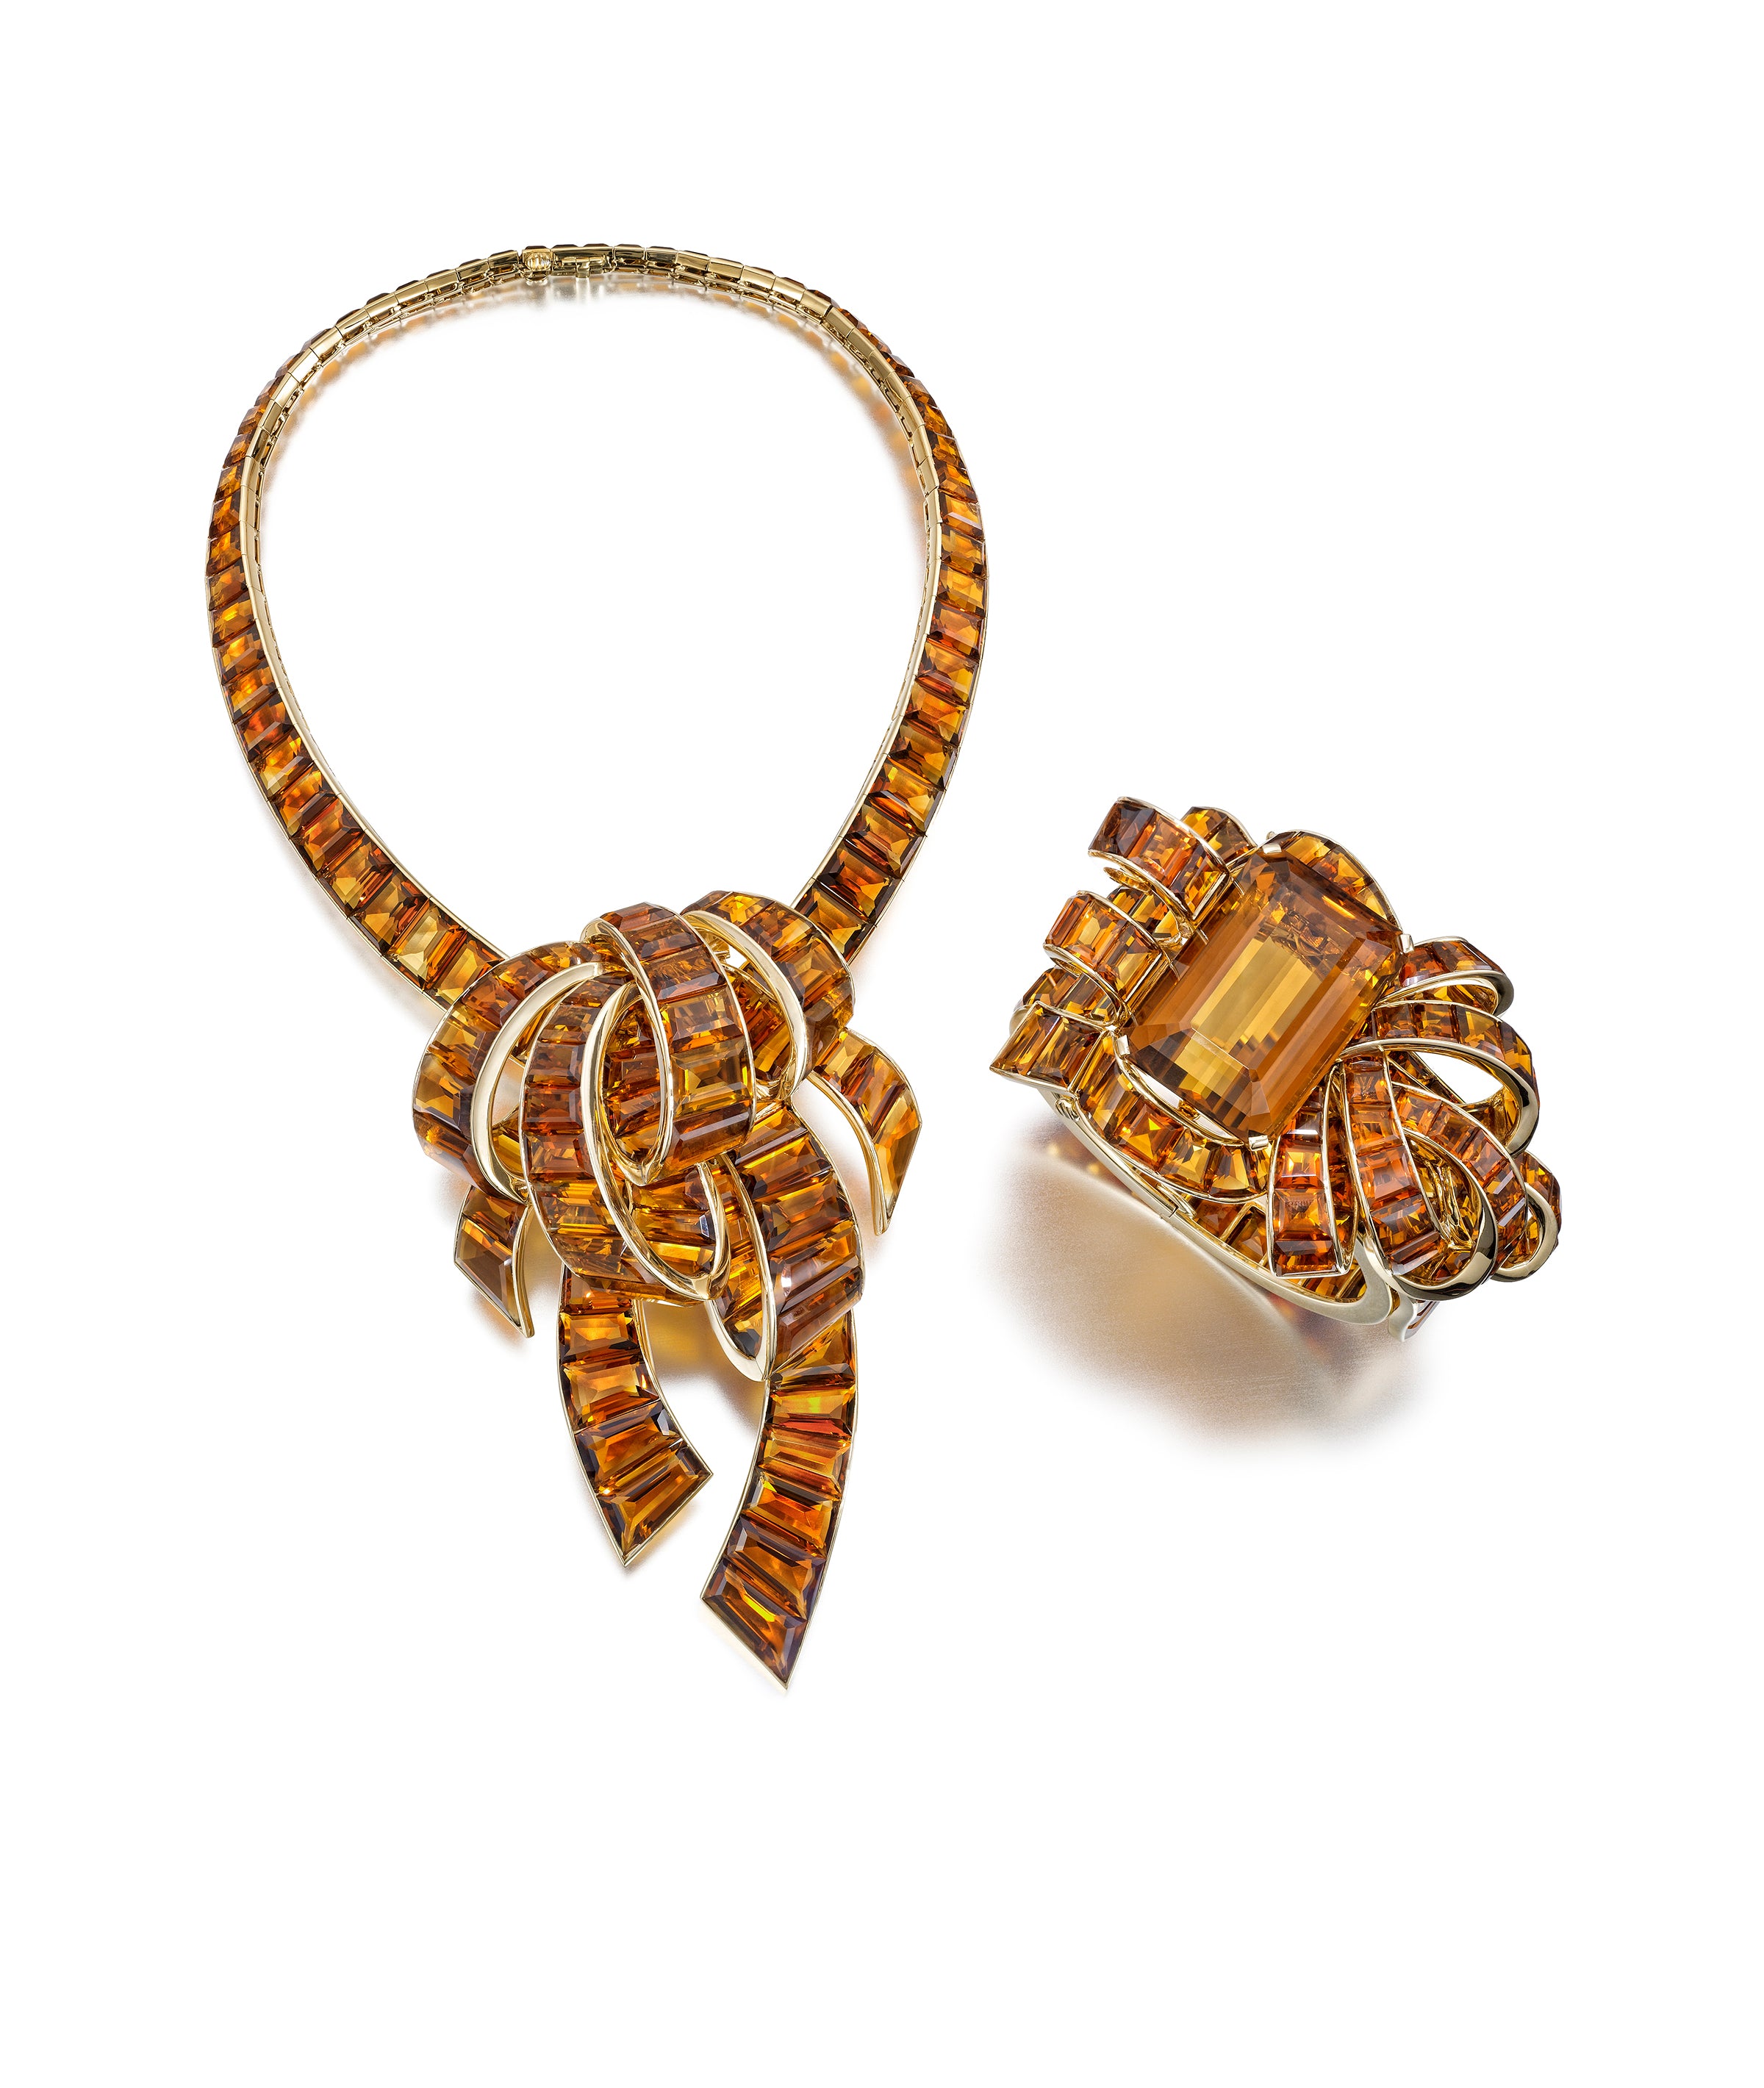 MODERNE  CITRINE  AND  GOLD  NECKLACE,  BROOCH,  AND  BRACELET  SUITE BY  TRABERT  &  HOEER-MAUBOUSSIN,  NEW  YORK,  CIRCA  1940